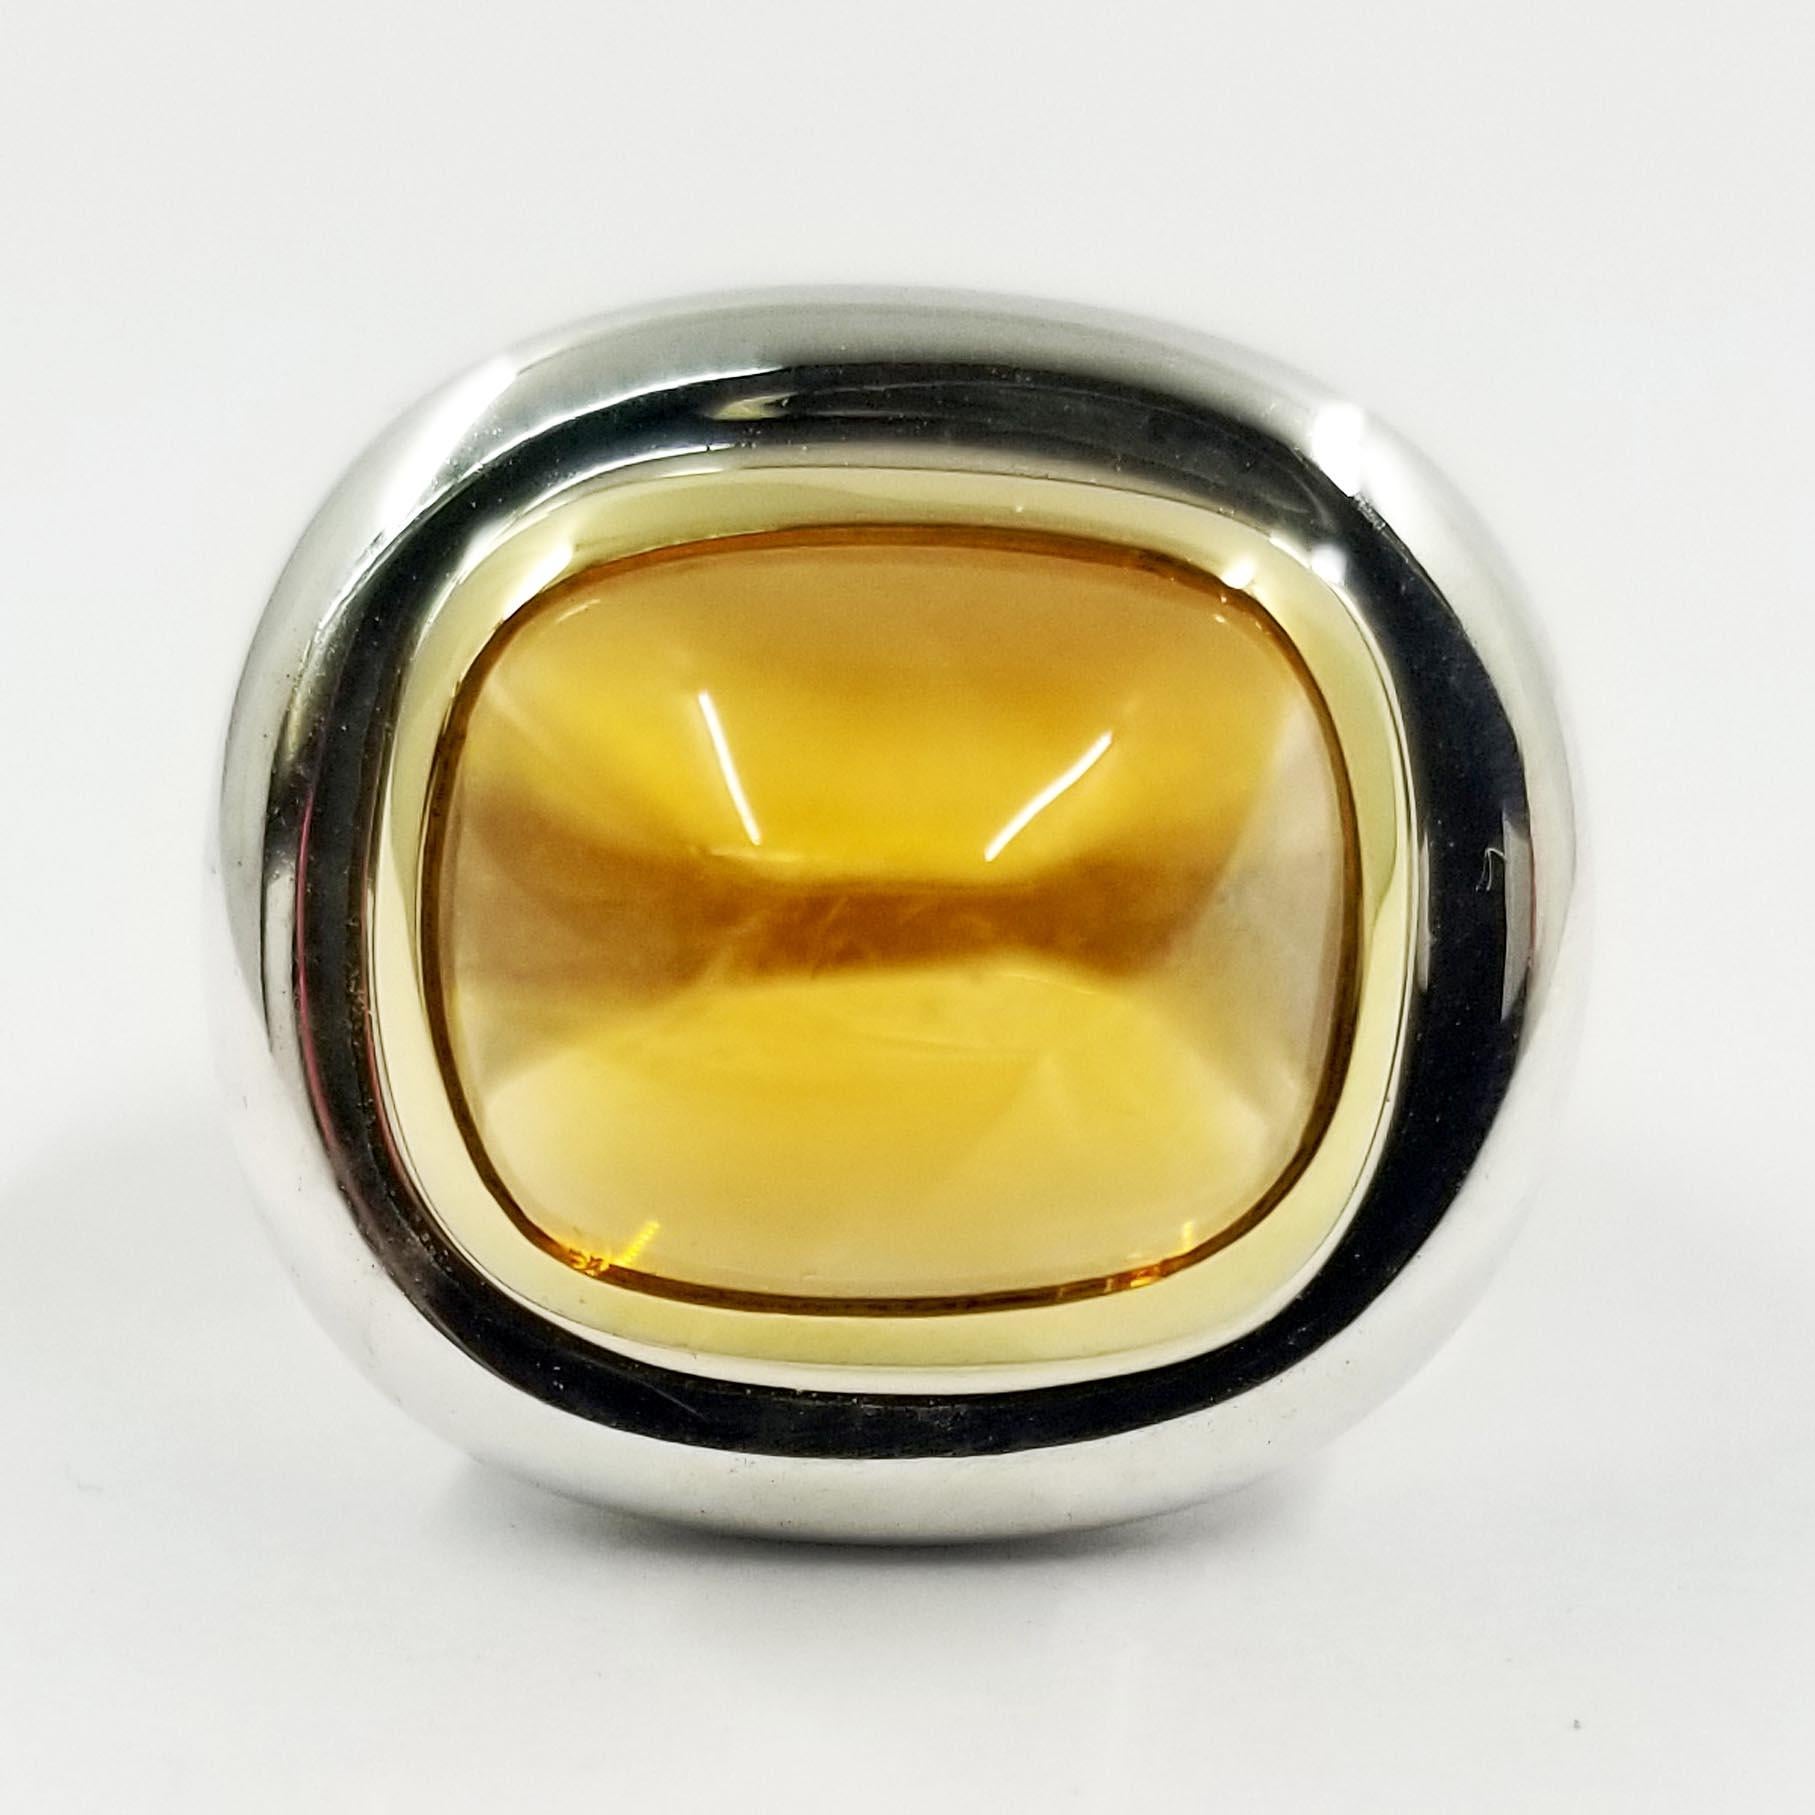 This modern ring is designed by Paloma Picasso for Tiffany & Co. It is crafted in both sterling silver and 18 karat yellow gold. The ring features a bezel set cabochon cut citrine quartz center stone. Current finger size 5.5; purchase includes free